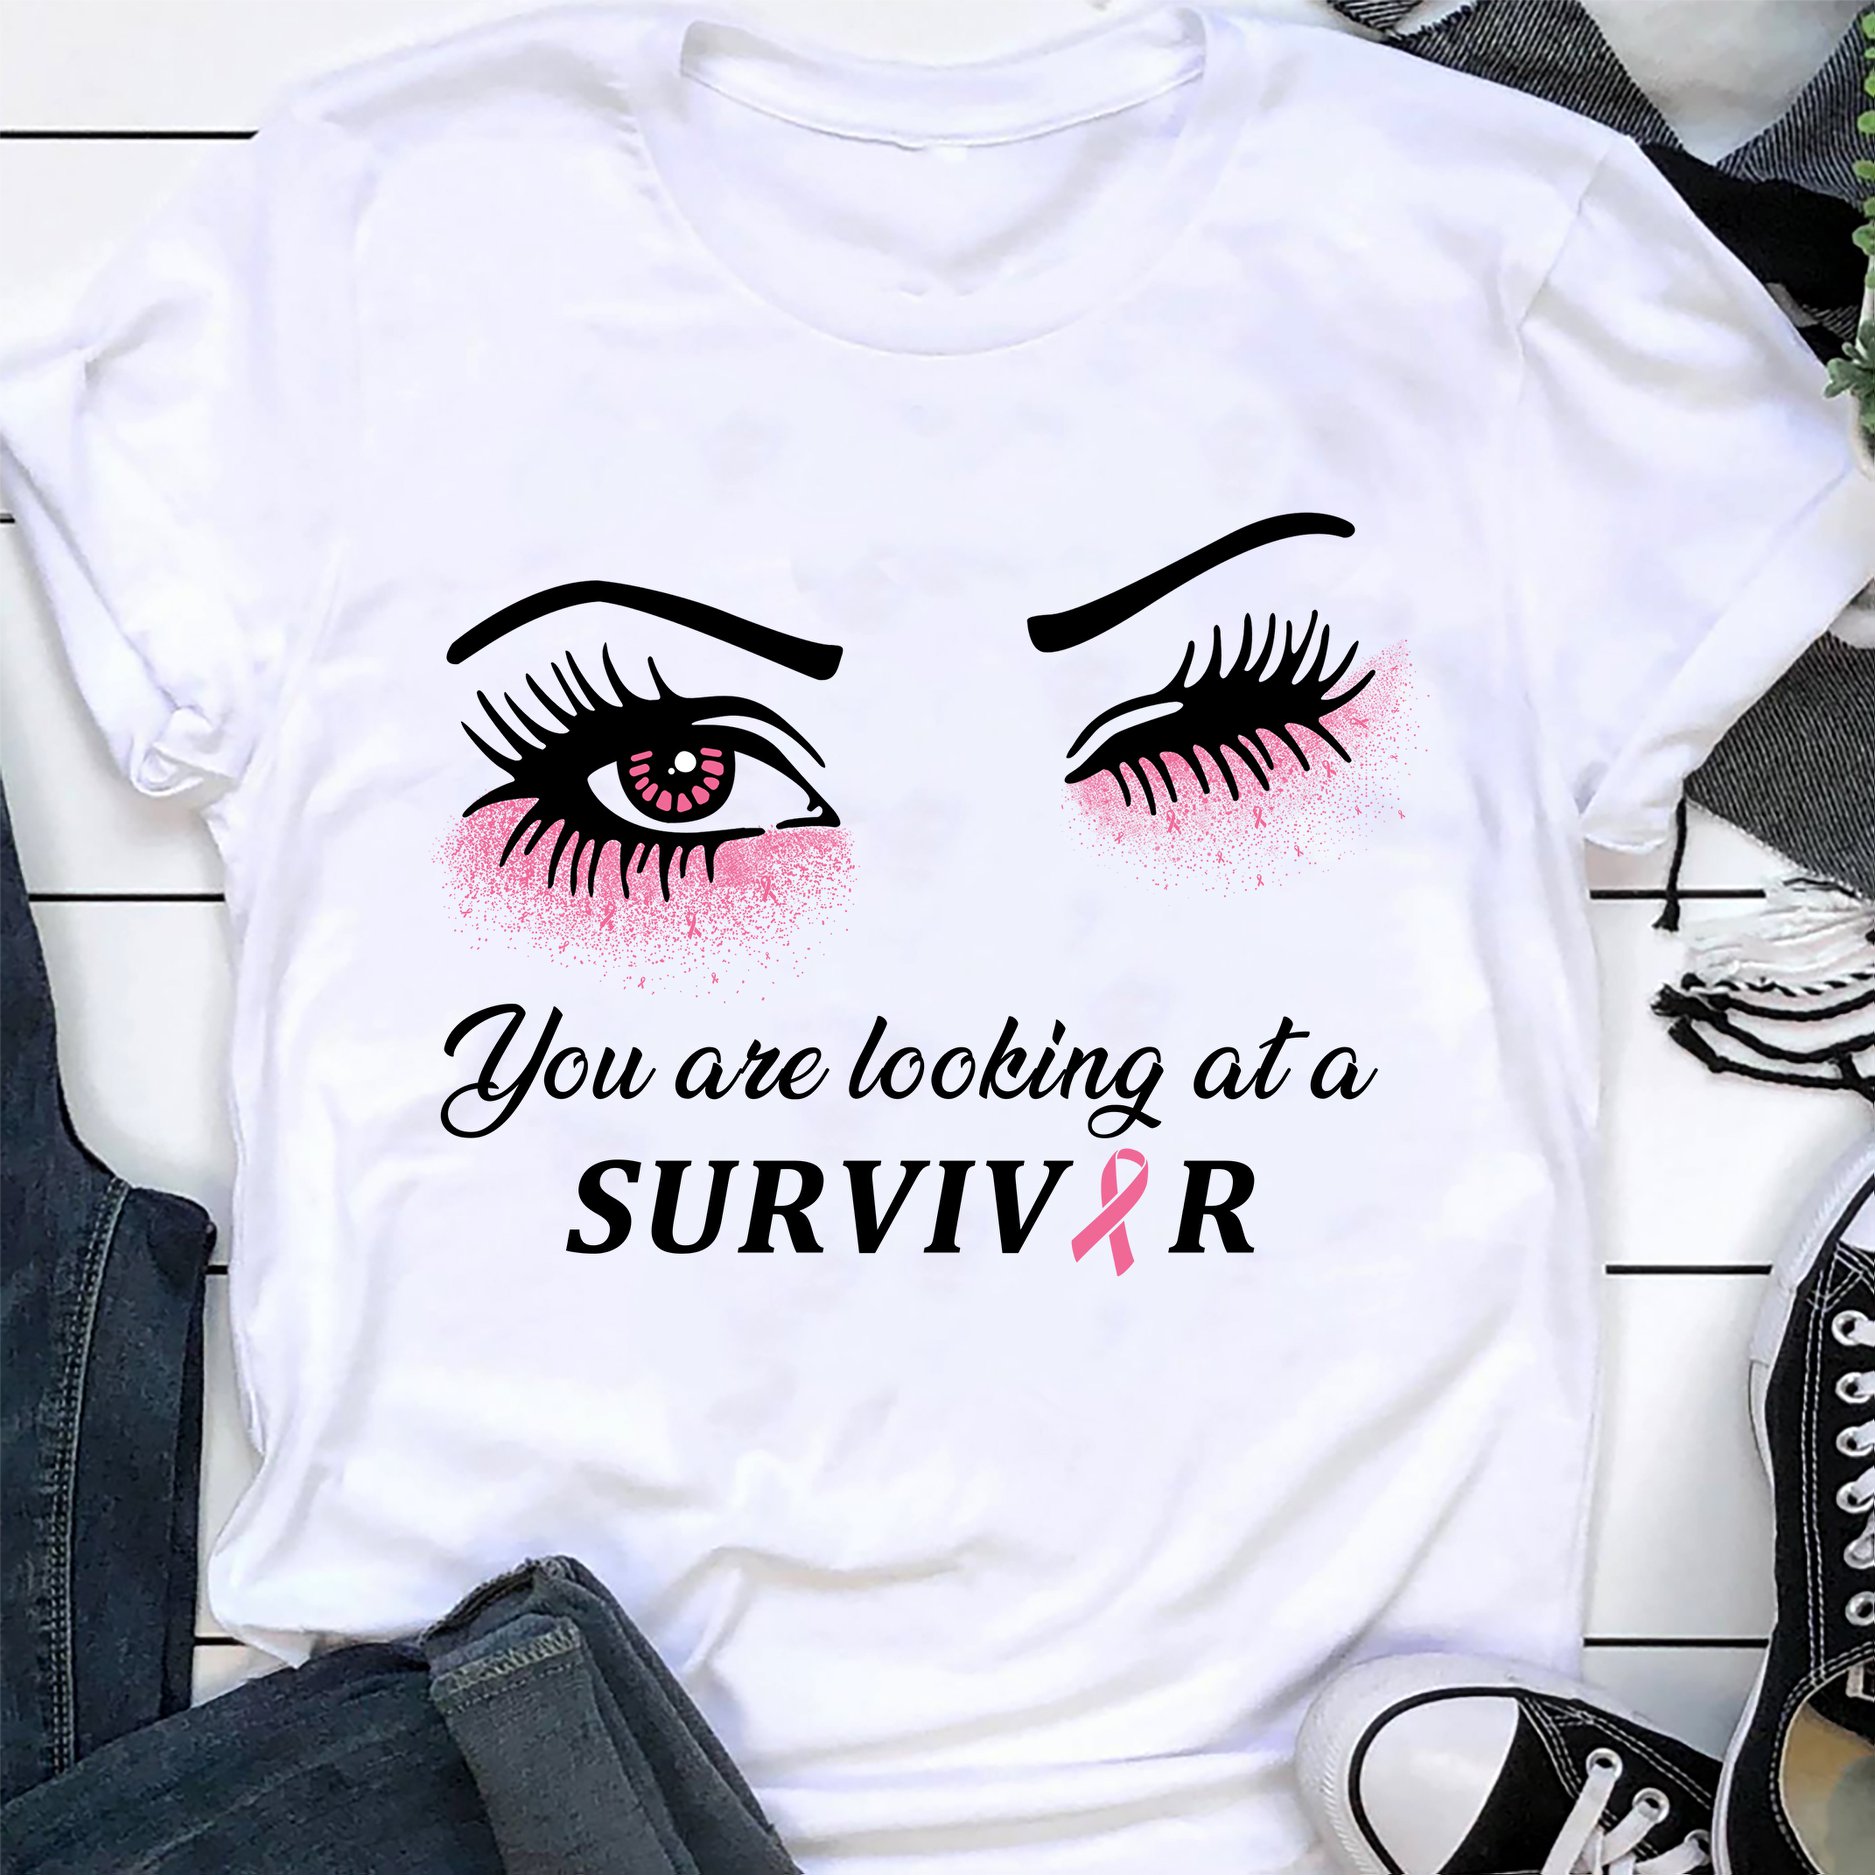 You are looking at a survivor - Woman's eyes